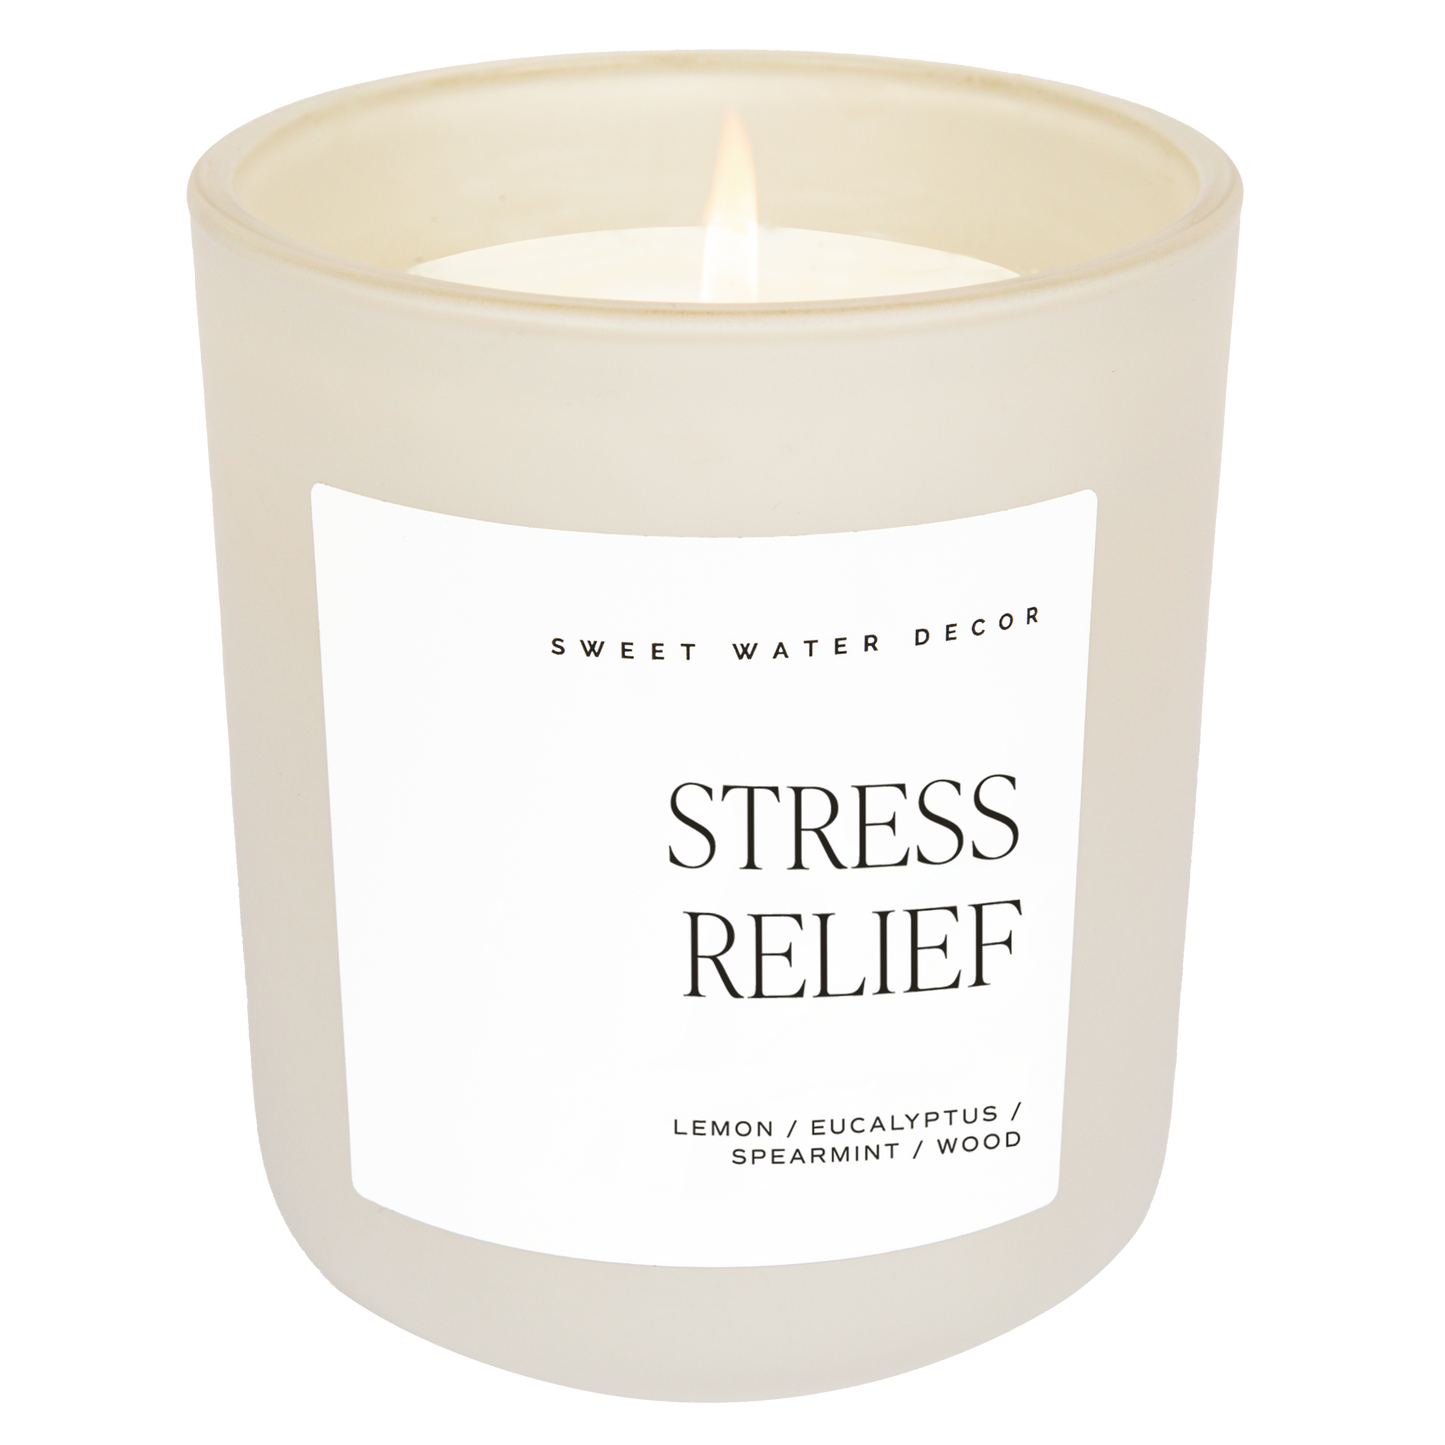 Stress Relief Soy Candle, Matte Jar, 15 oz